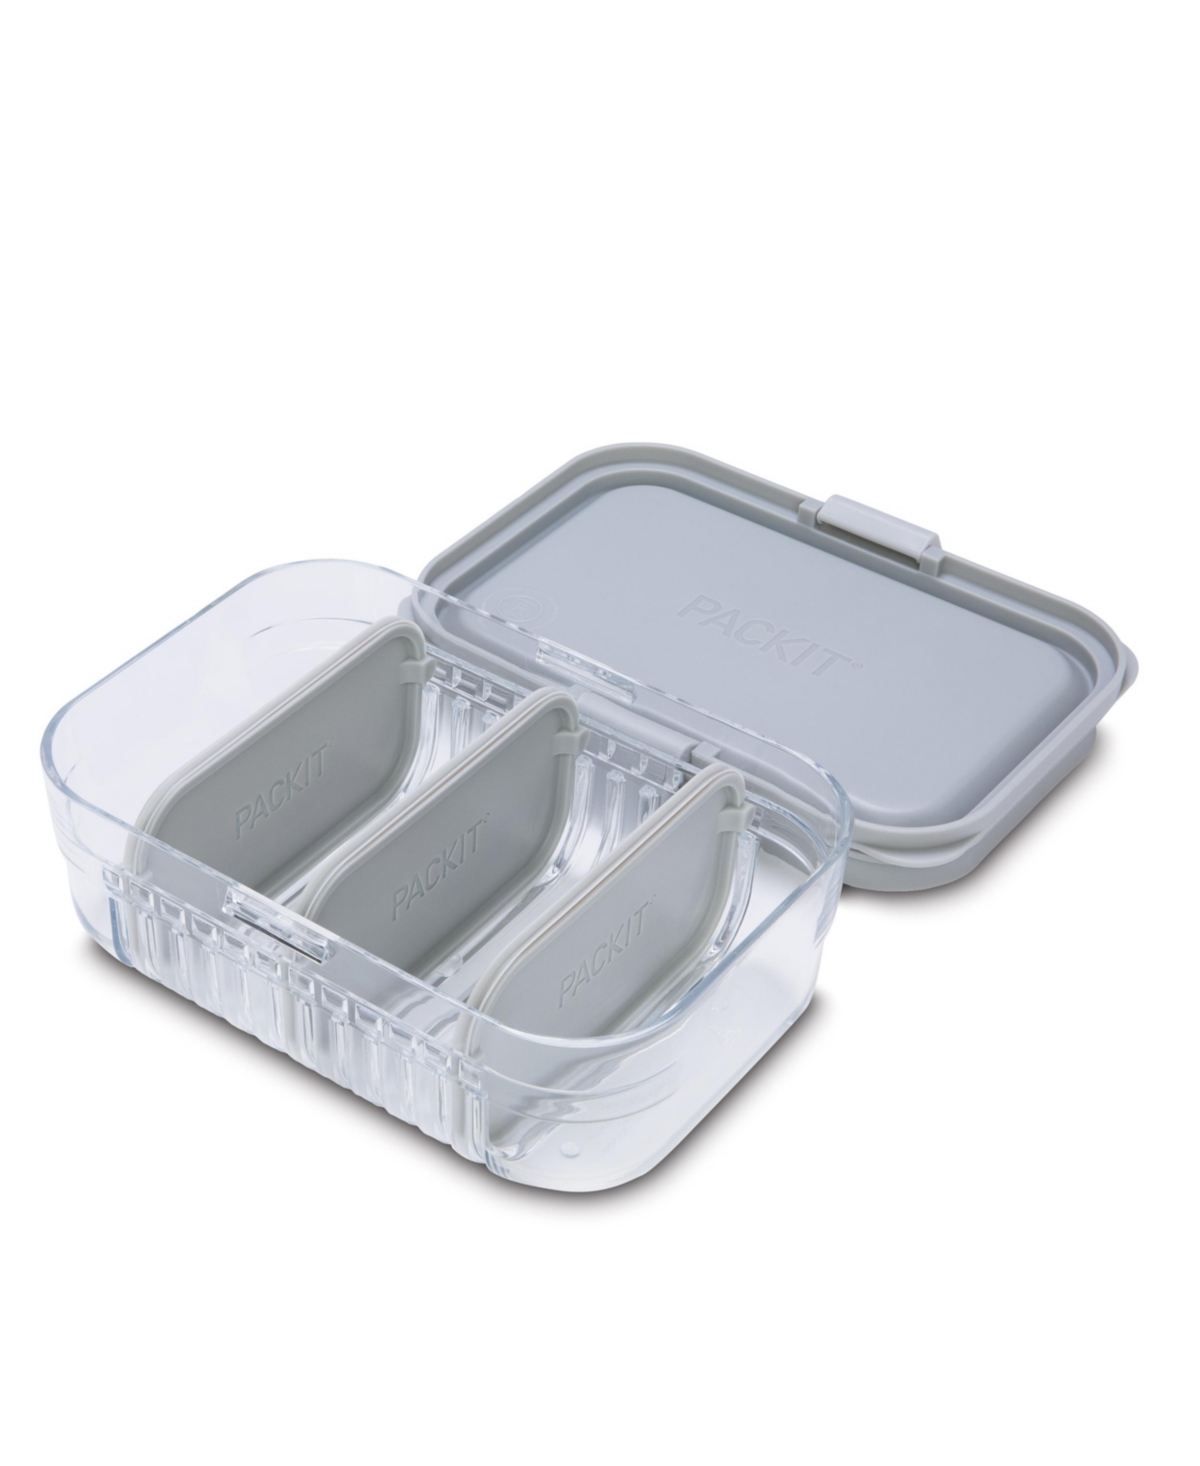 Pack It Mod Lunch Bento And Mod Snack Bento Set, 6 Piece In Steel Gray